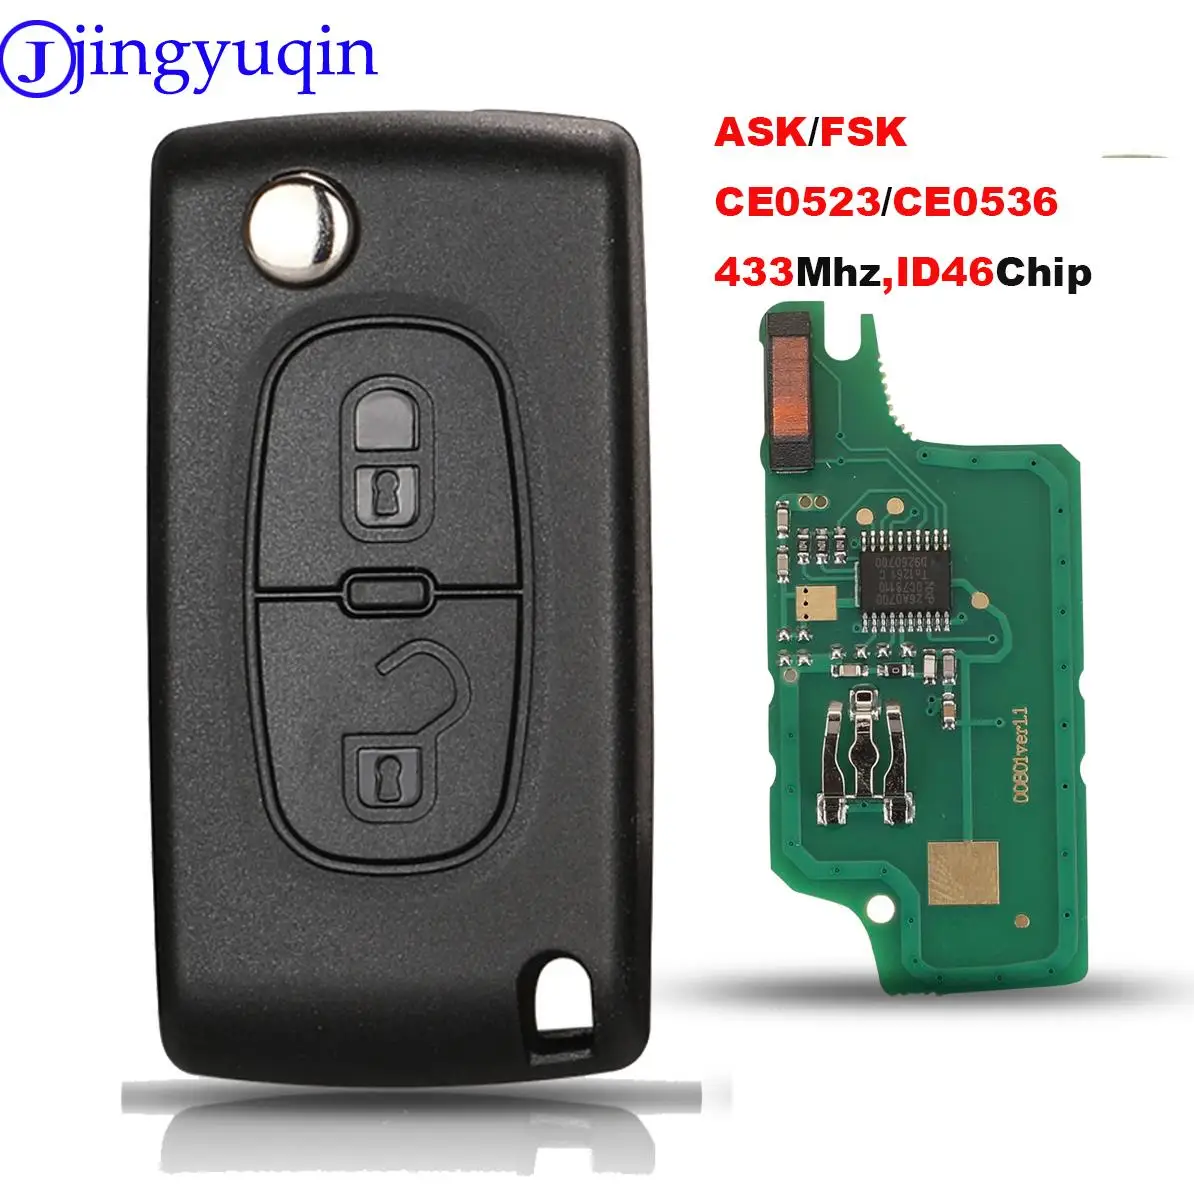 jingyuqin 10p 434Mhz ASK FSK For Peugeot 107 207 307 308 407 607 CE0523 Ce0536